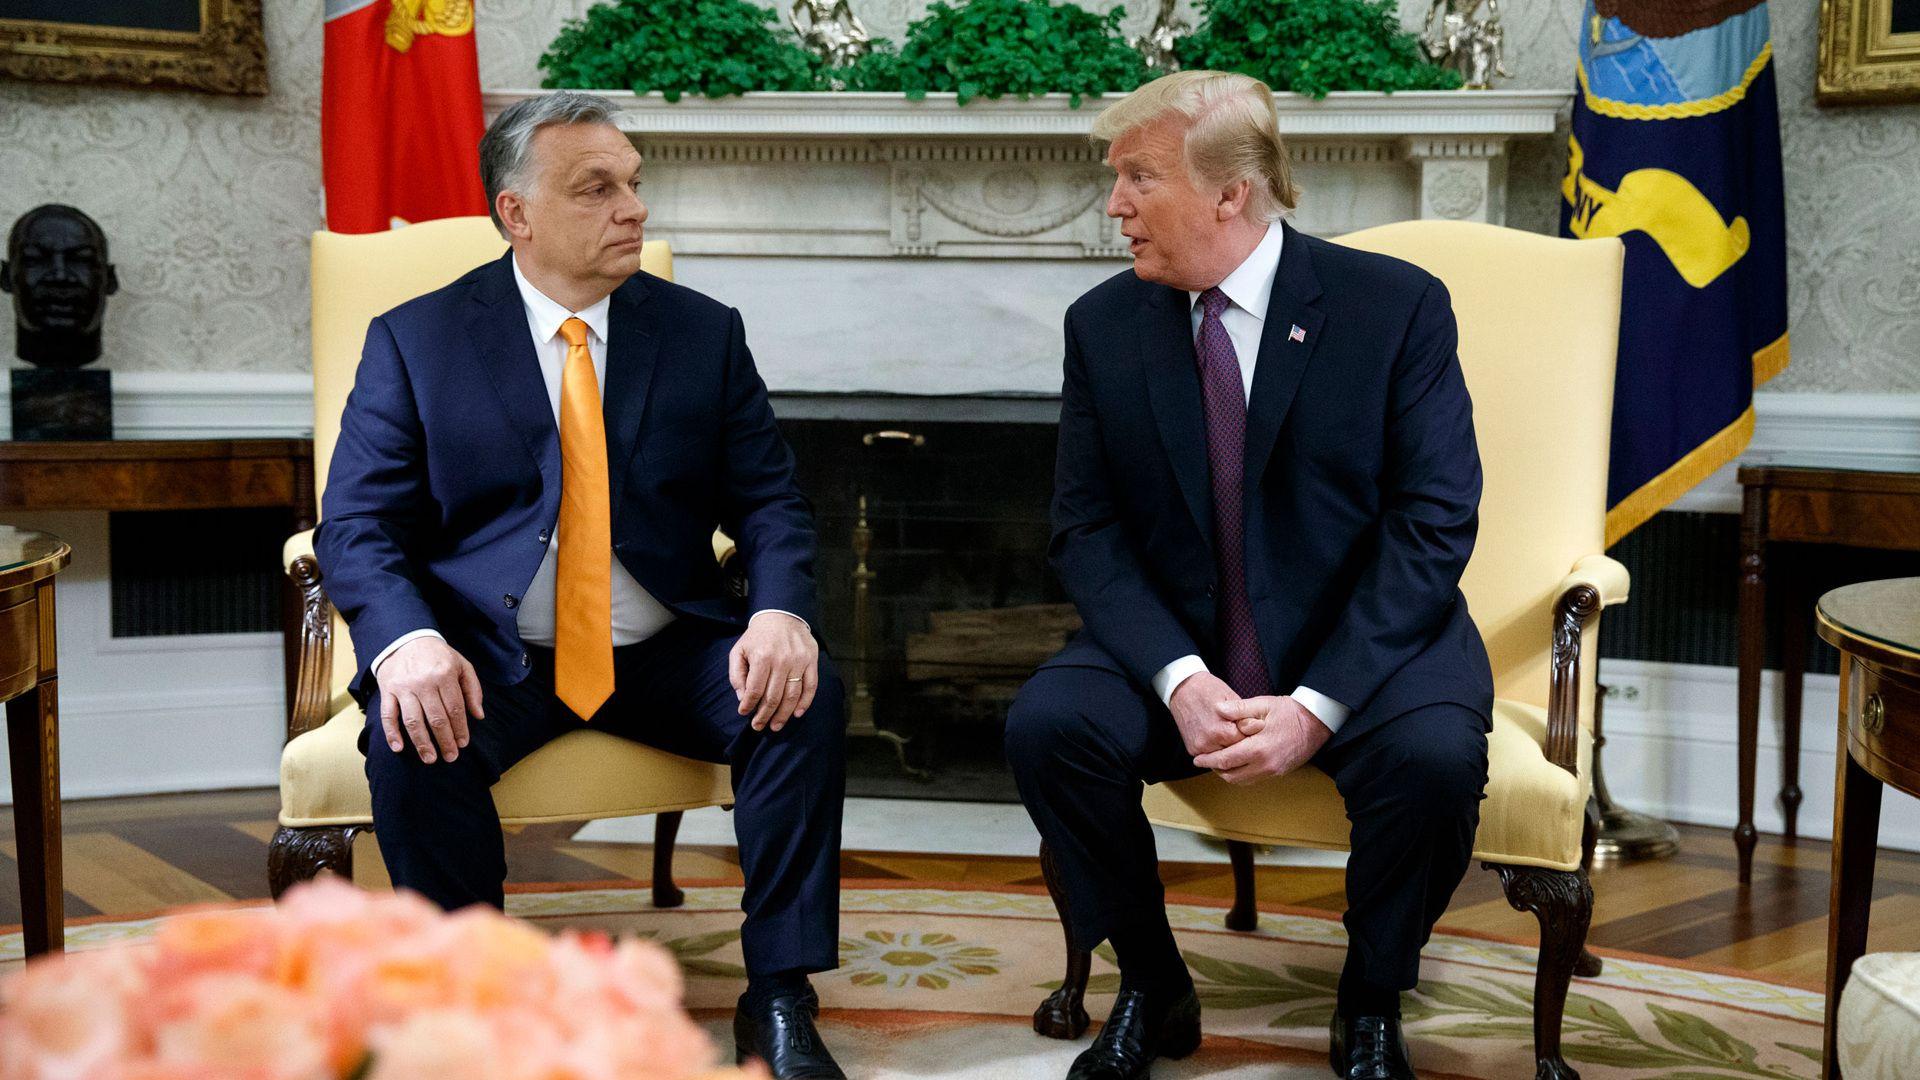 Orban to discuss peace in Ukraine with Trump